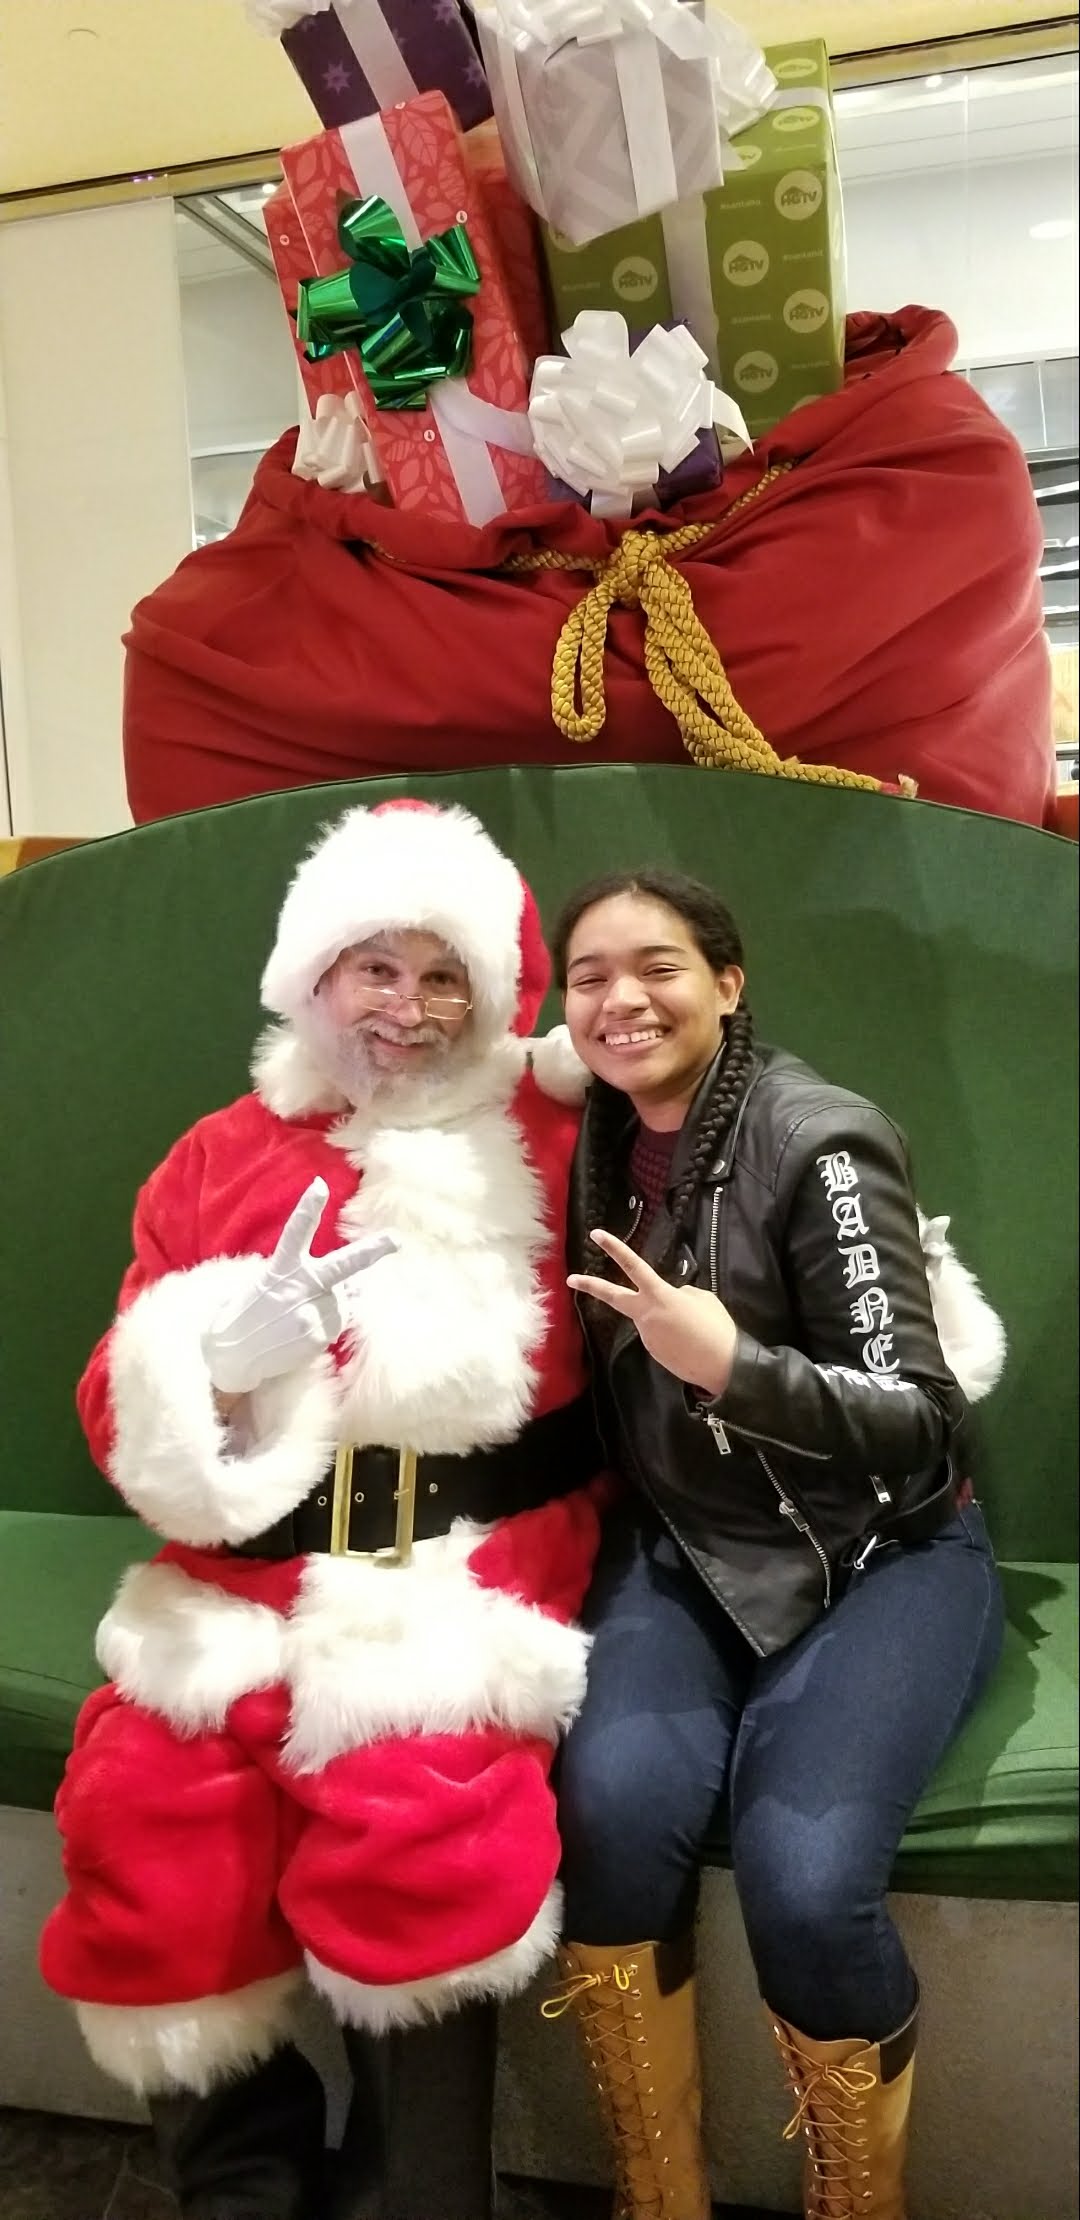 Visiting Santa is a Great Family Tradition